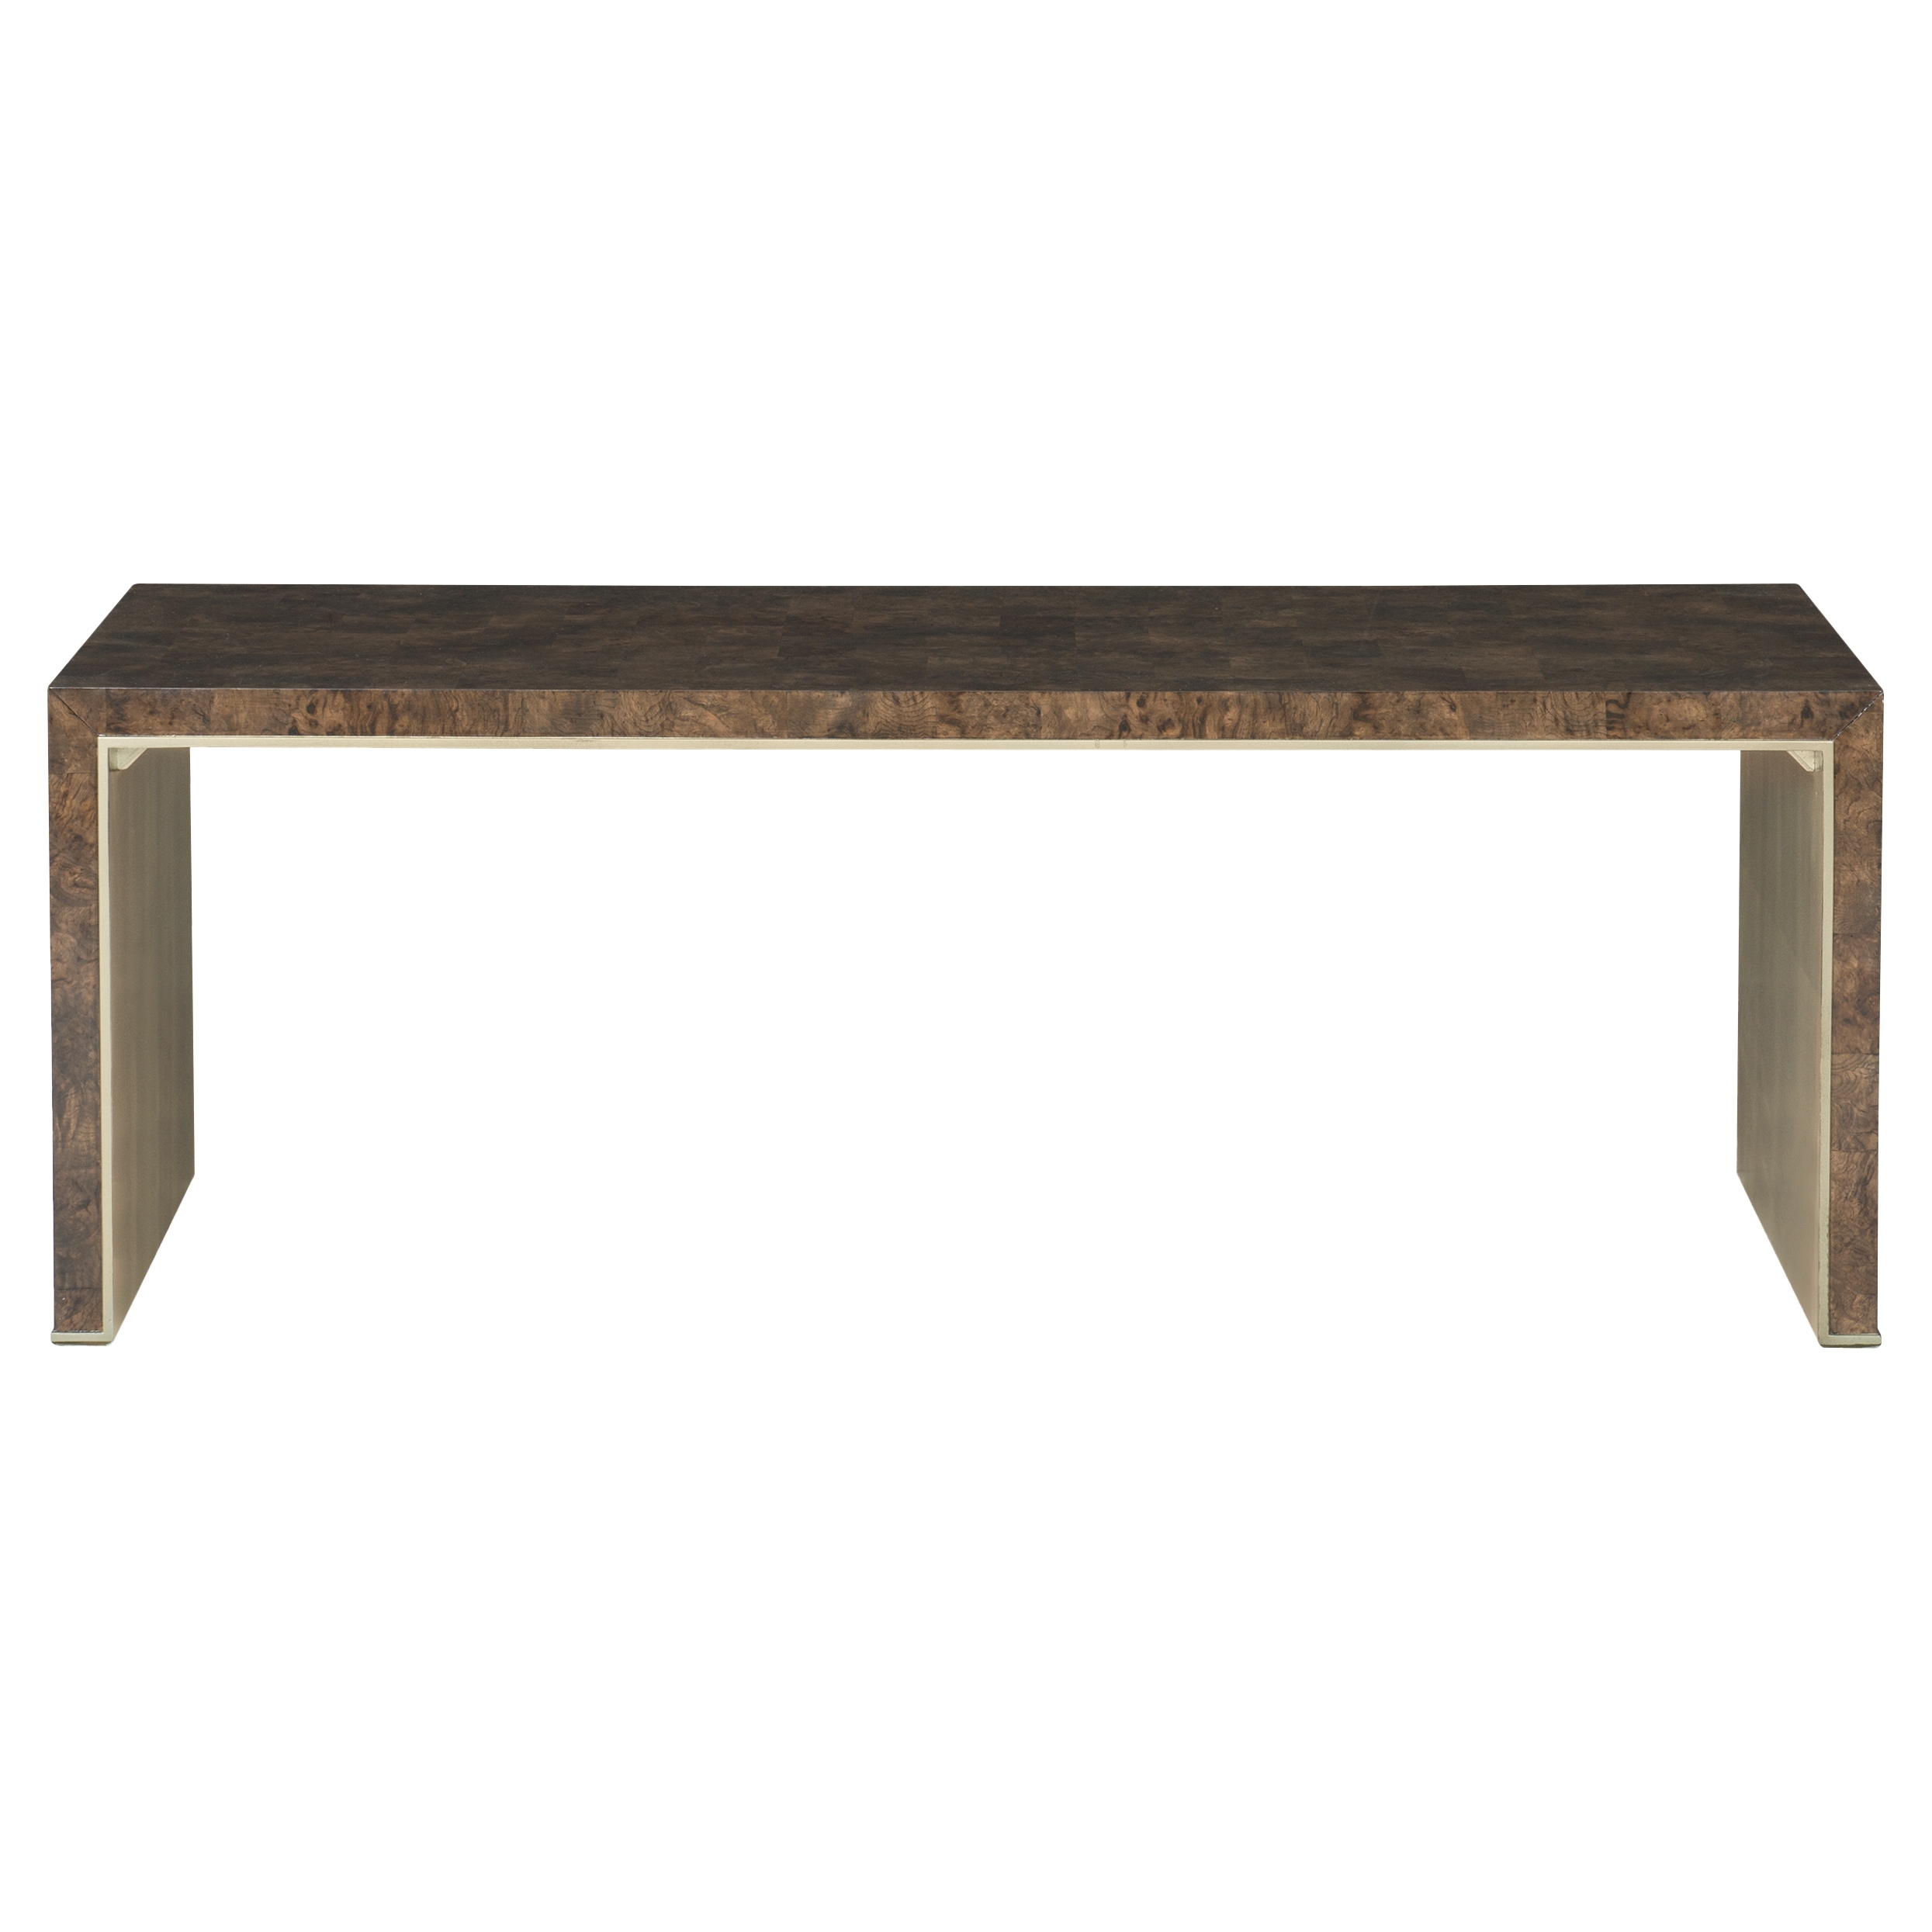 Claire Modern Brown Oak Burl Wood Gold Interior Coffee Table - Image 1